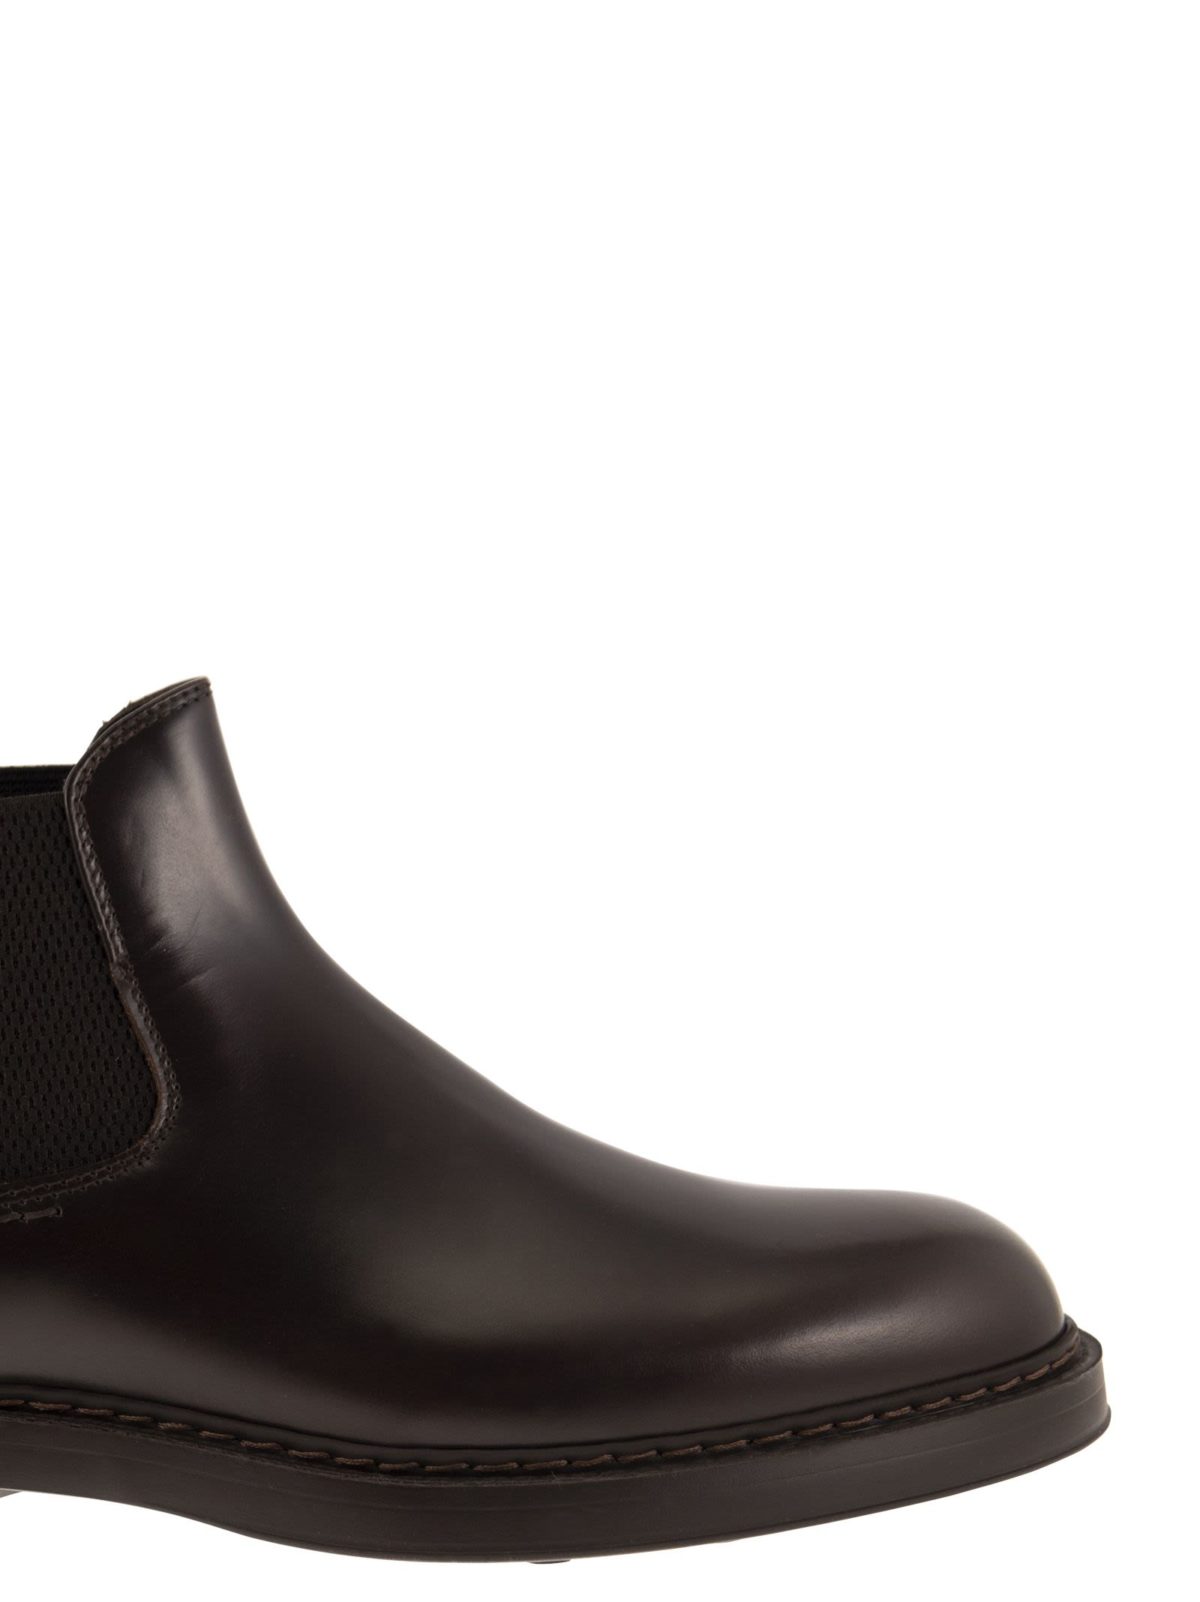 Chelsea leather ankle boot - Bellettini.com